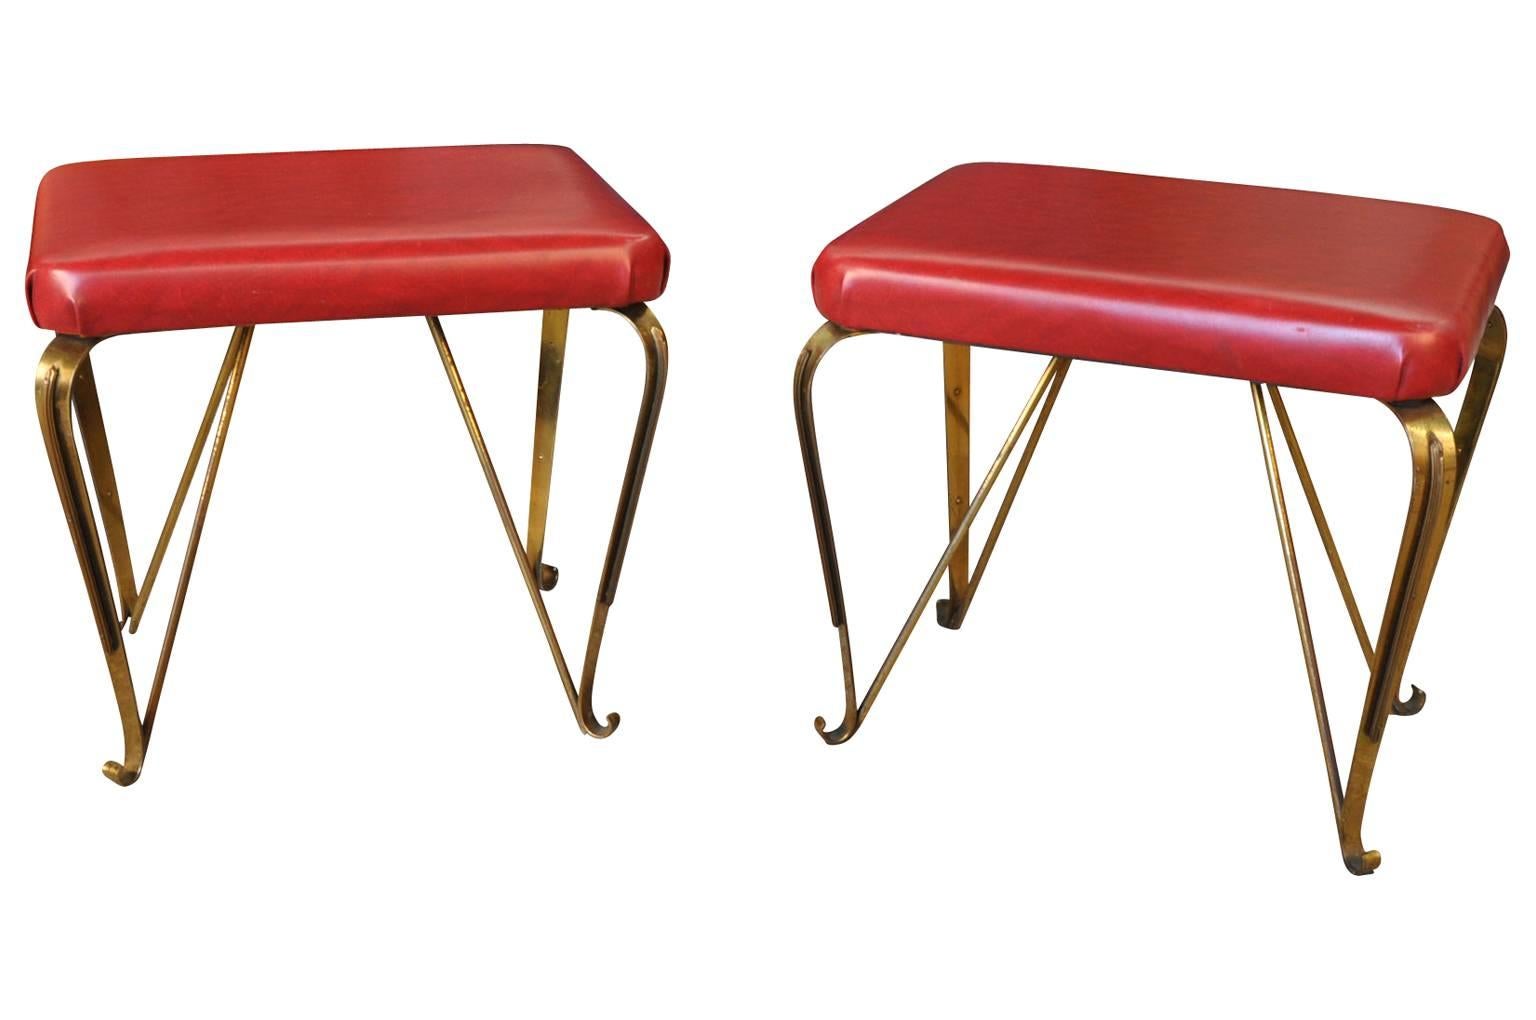 A terrific pair of Italian Mid-Century Modern stools. Wonderful design and constructed from patinated metal. Great accent pieces to give style and color to an interior.